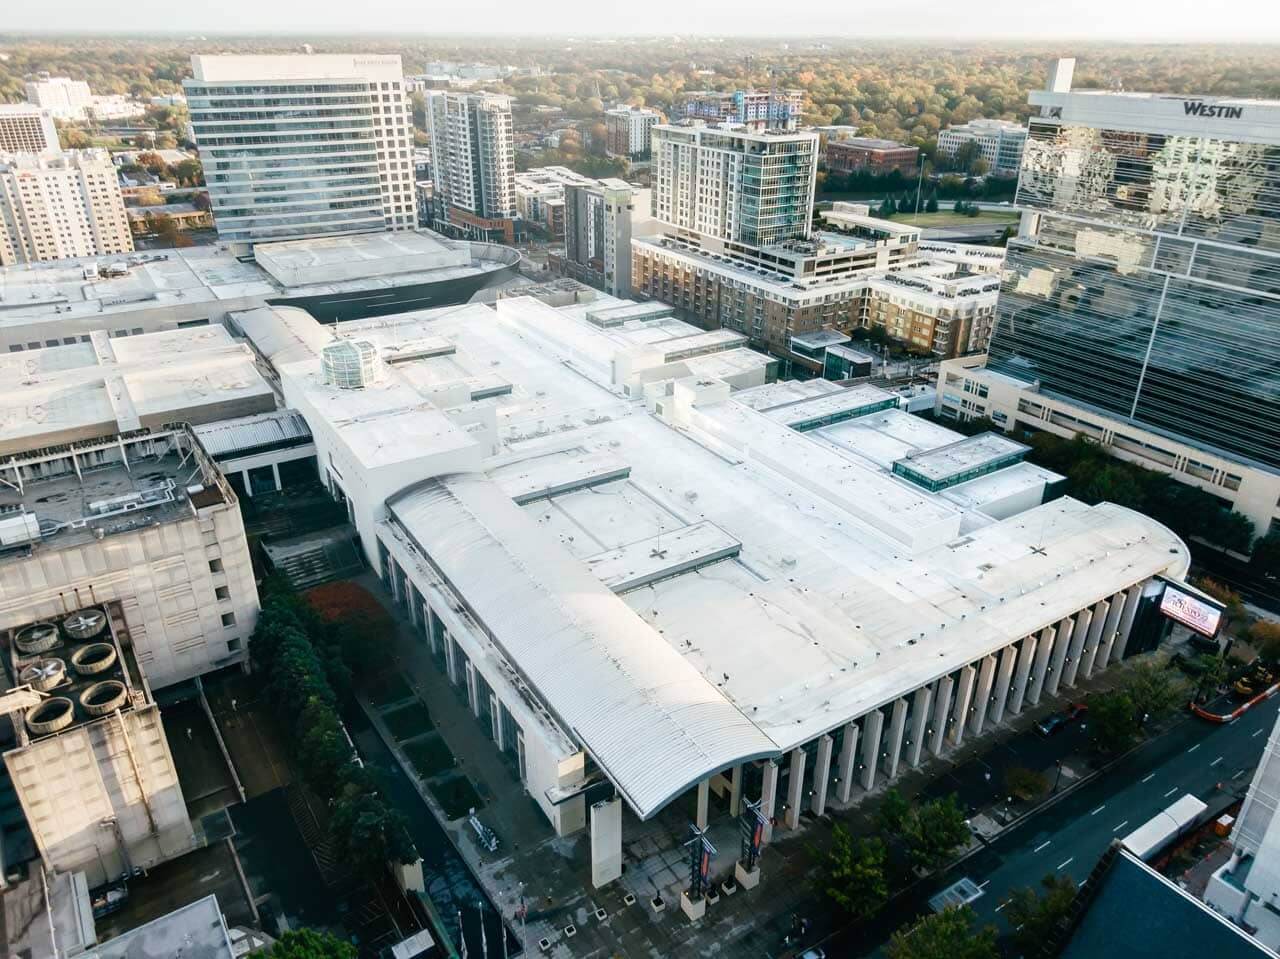 Aerial view of a large convention center